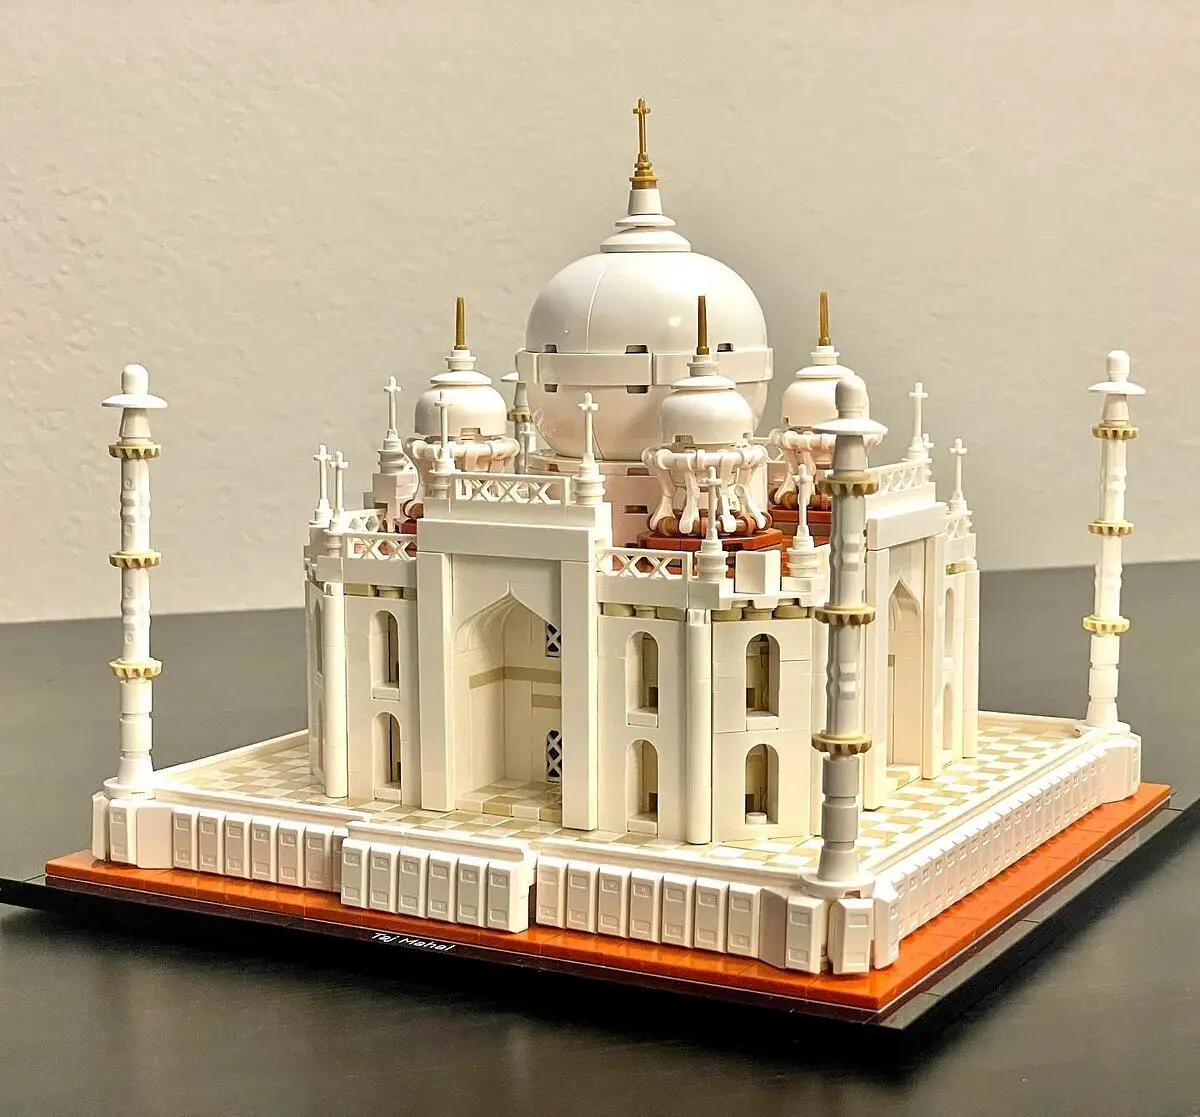 LEGO Architecture Taj Mahal 21056 Building Set - Landmarks Collection,  Display Model, Collectible Home Décor Gift Idea and Model Kits for Adults  and